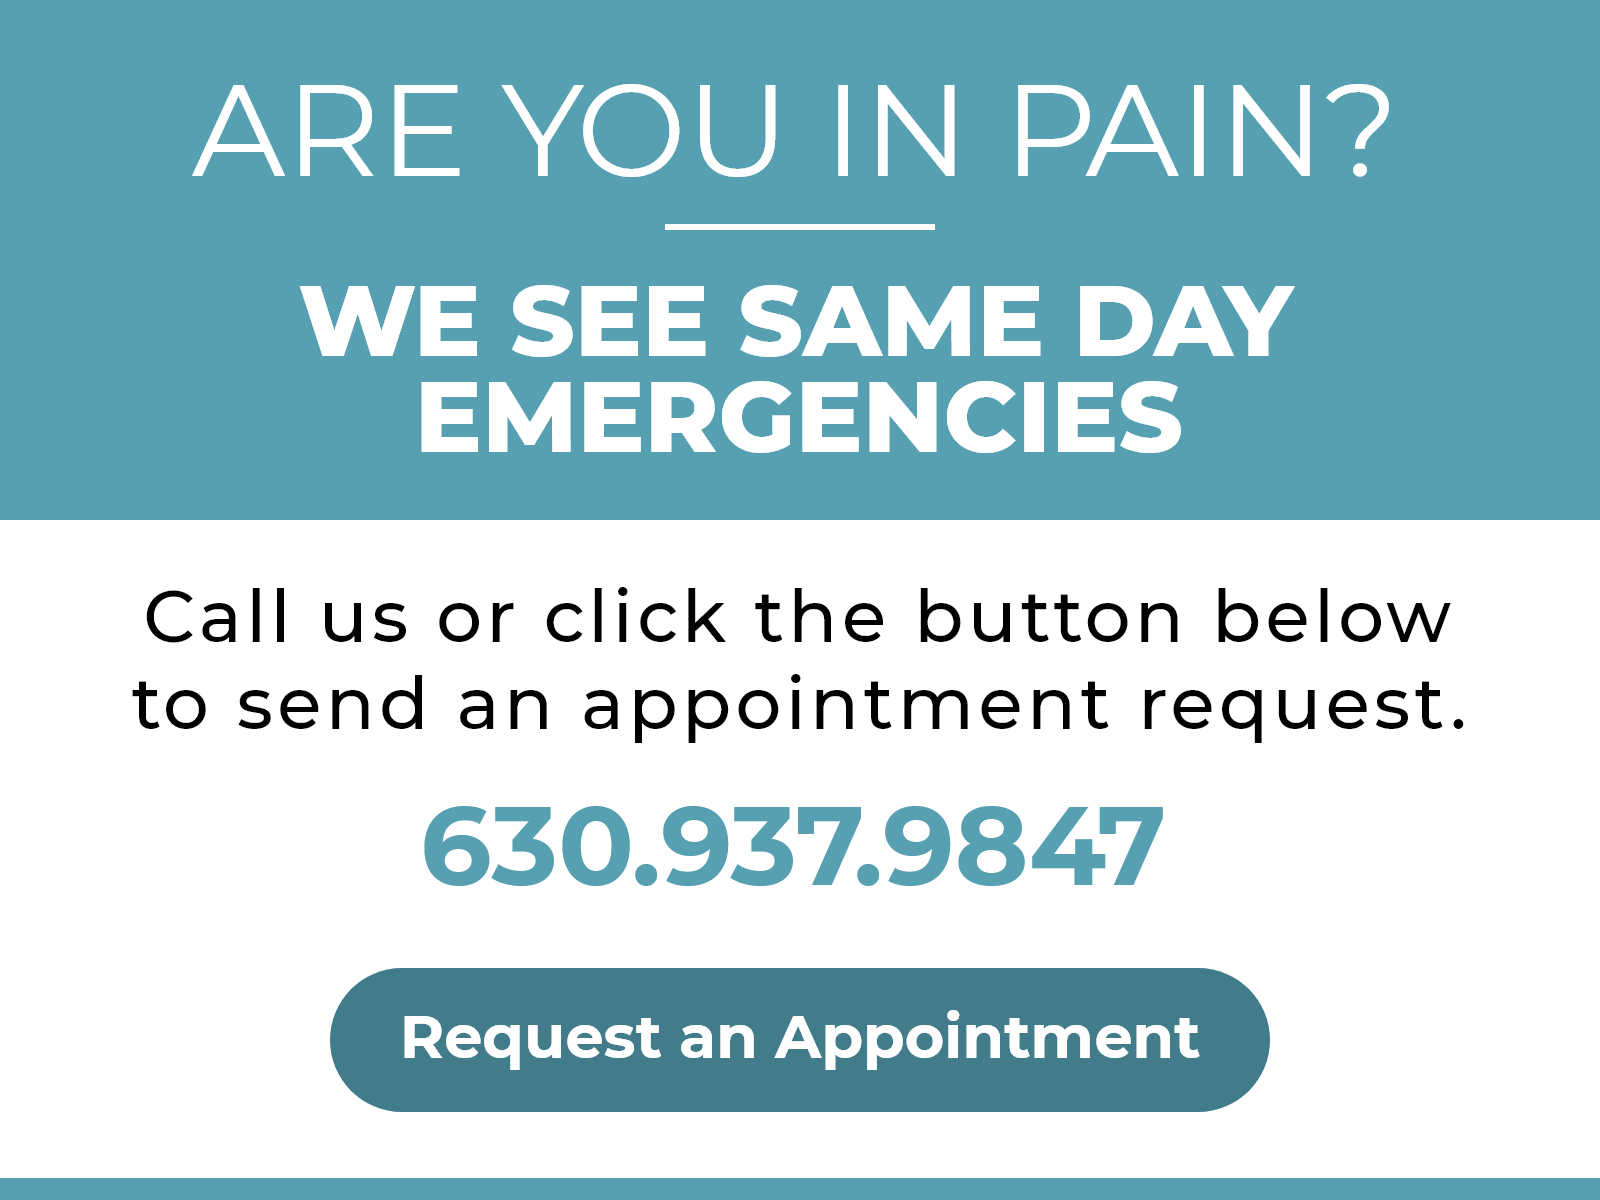 Are you in pain? We see same day emergencies. Call us or click the button below to send an appointment request.